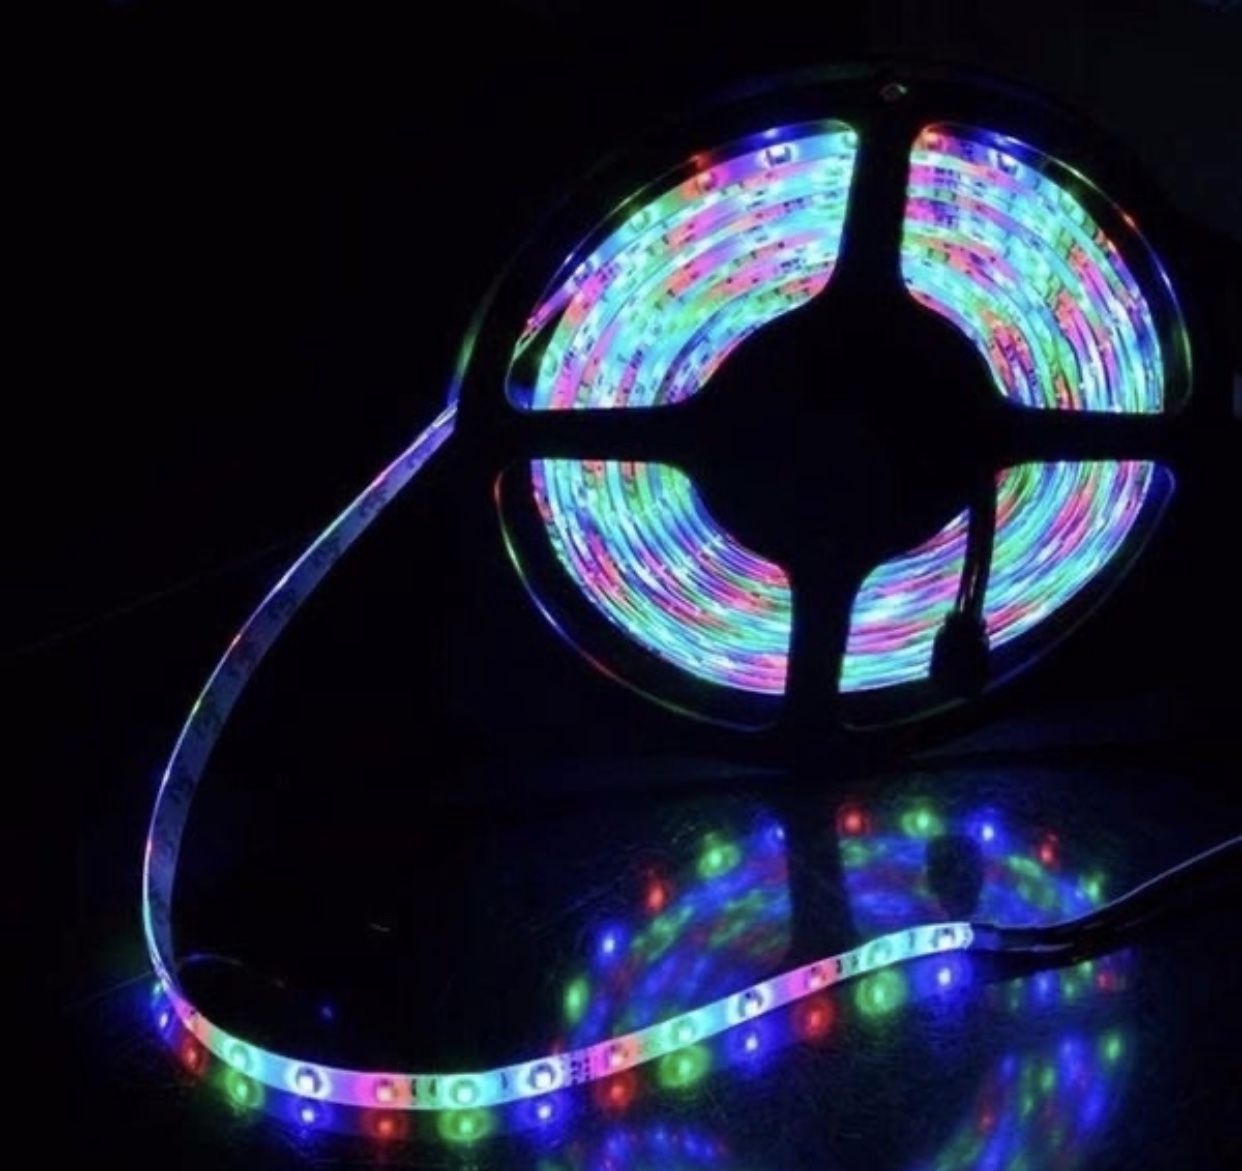 LED Strips for underglow tv or walls